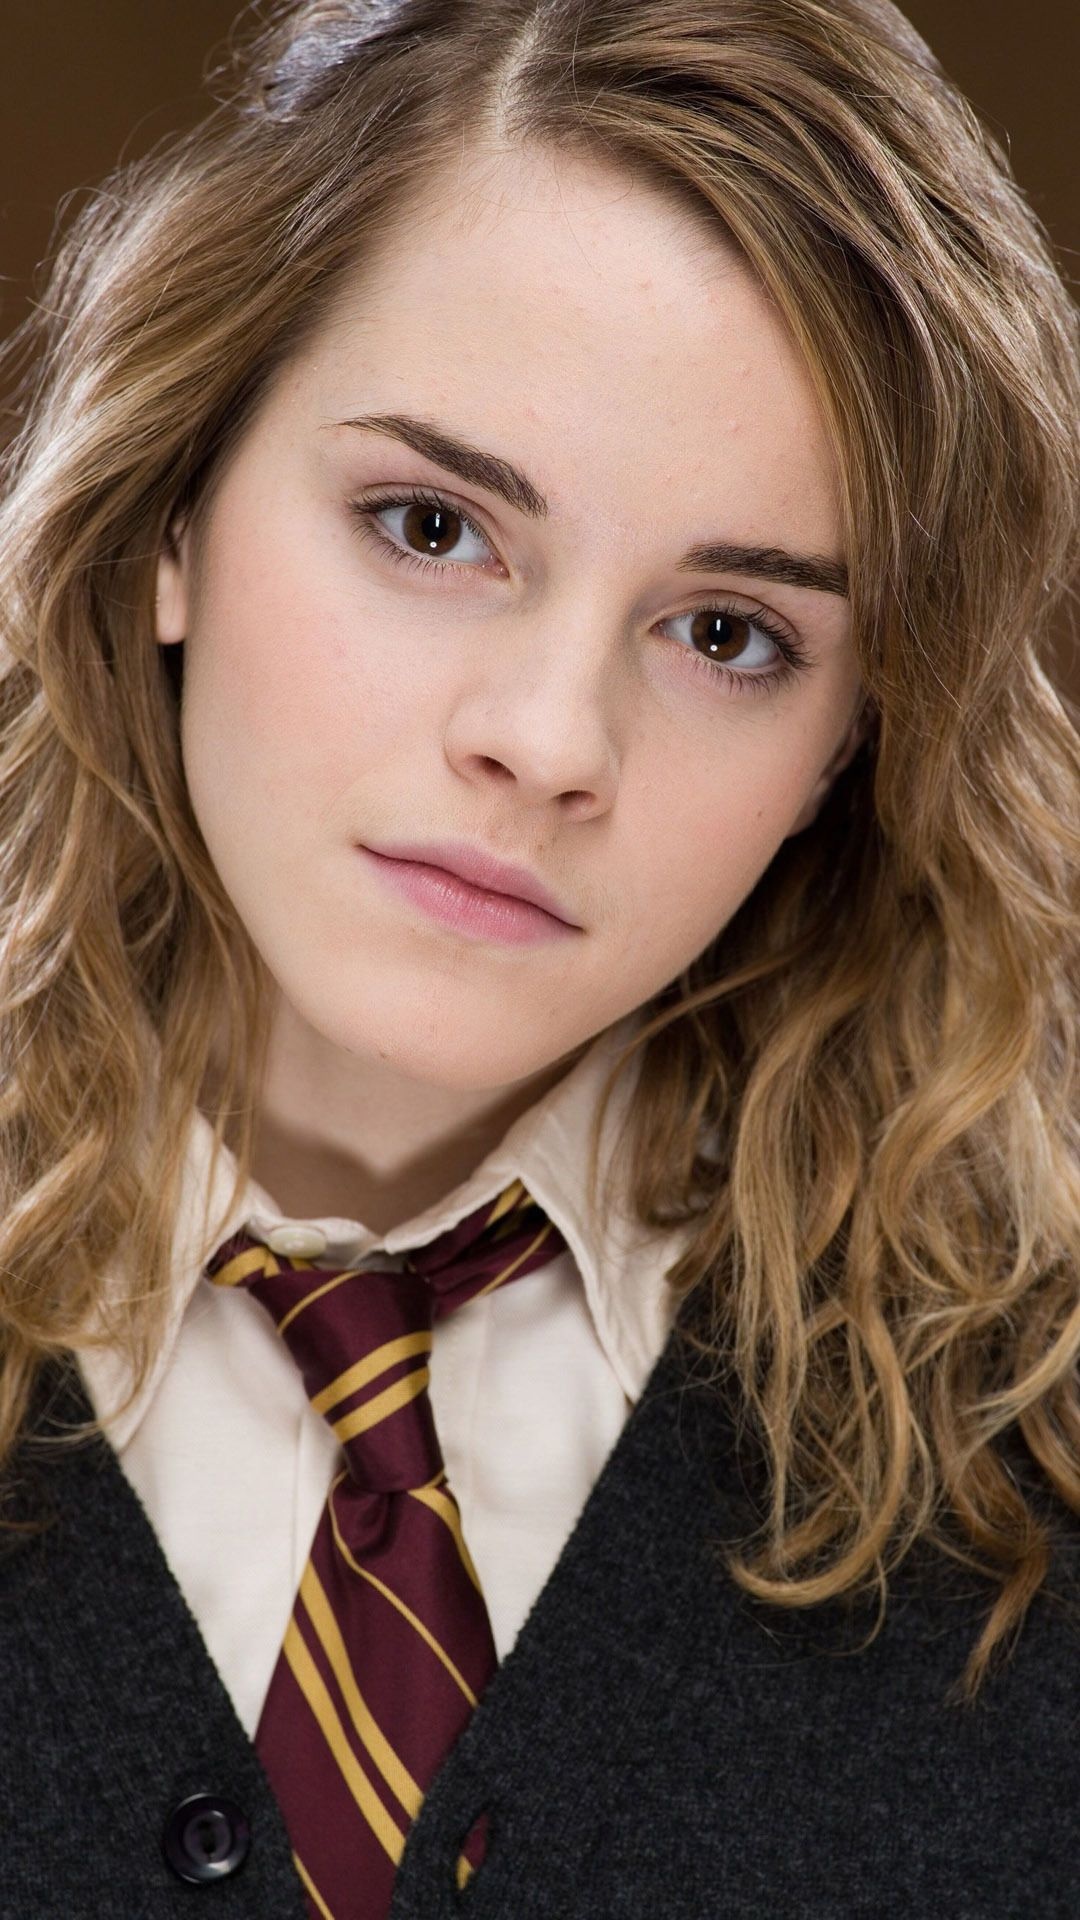 Hermione: Portrayed by Emma Watson in all eight Harry Potter films from Philosopher's Stone in 2001 to Deathly Hallows – Part 2 in 2011. 1080x1920 Full HD Wallpaper.